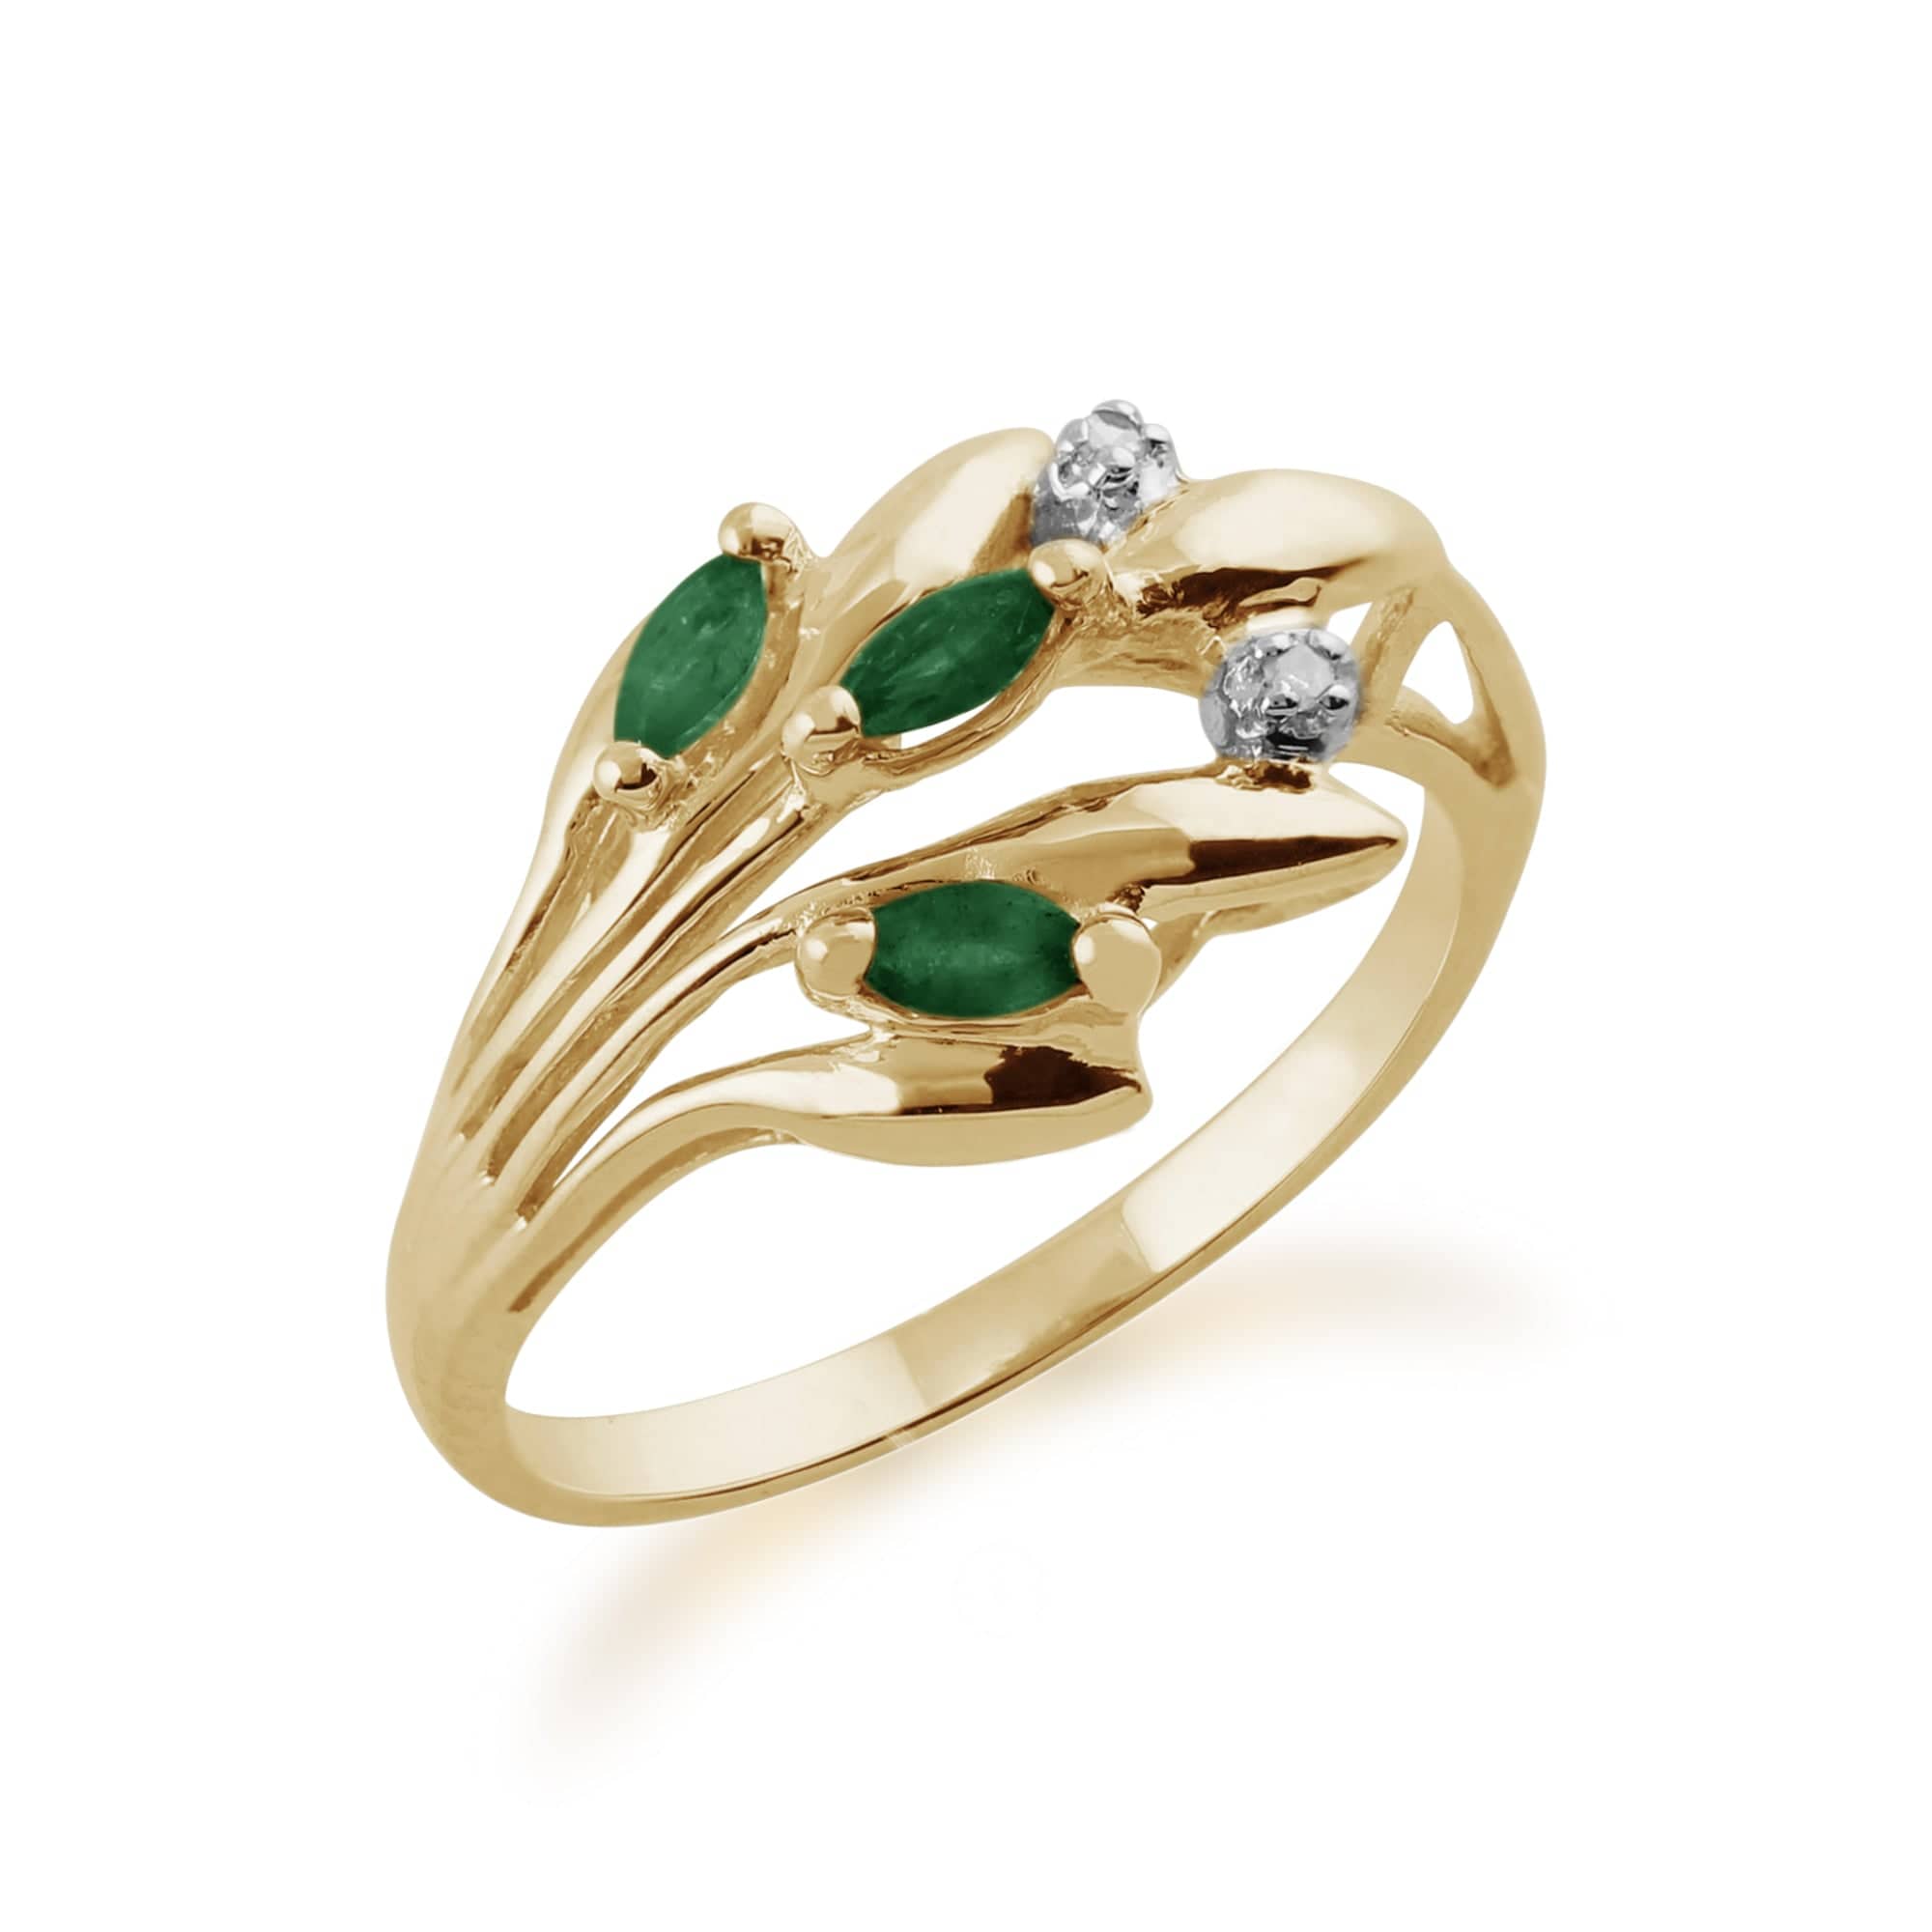 11240 Floral Marquise Emerald & Diamond Ring in 9ct Yellow Gold 3